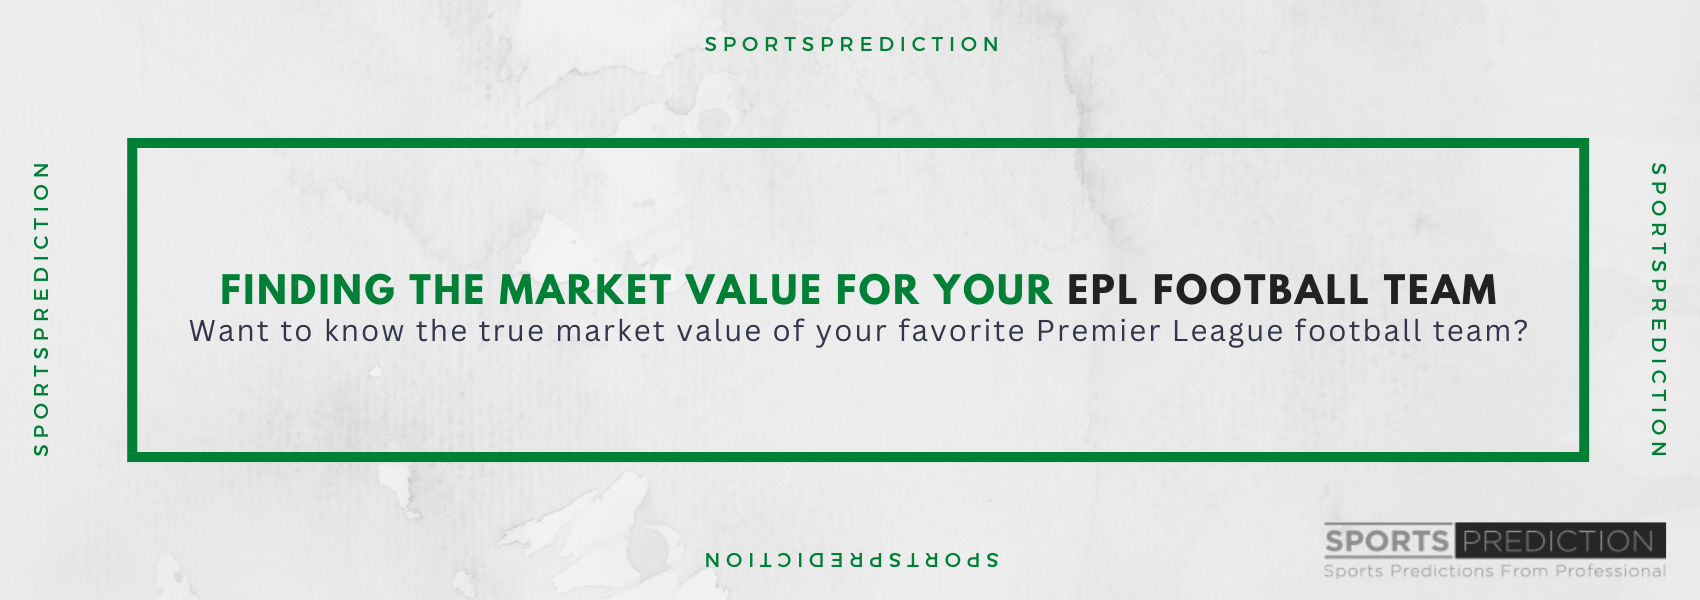 Finding The Market Value For Your EPL Football Team